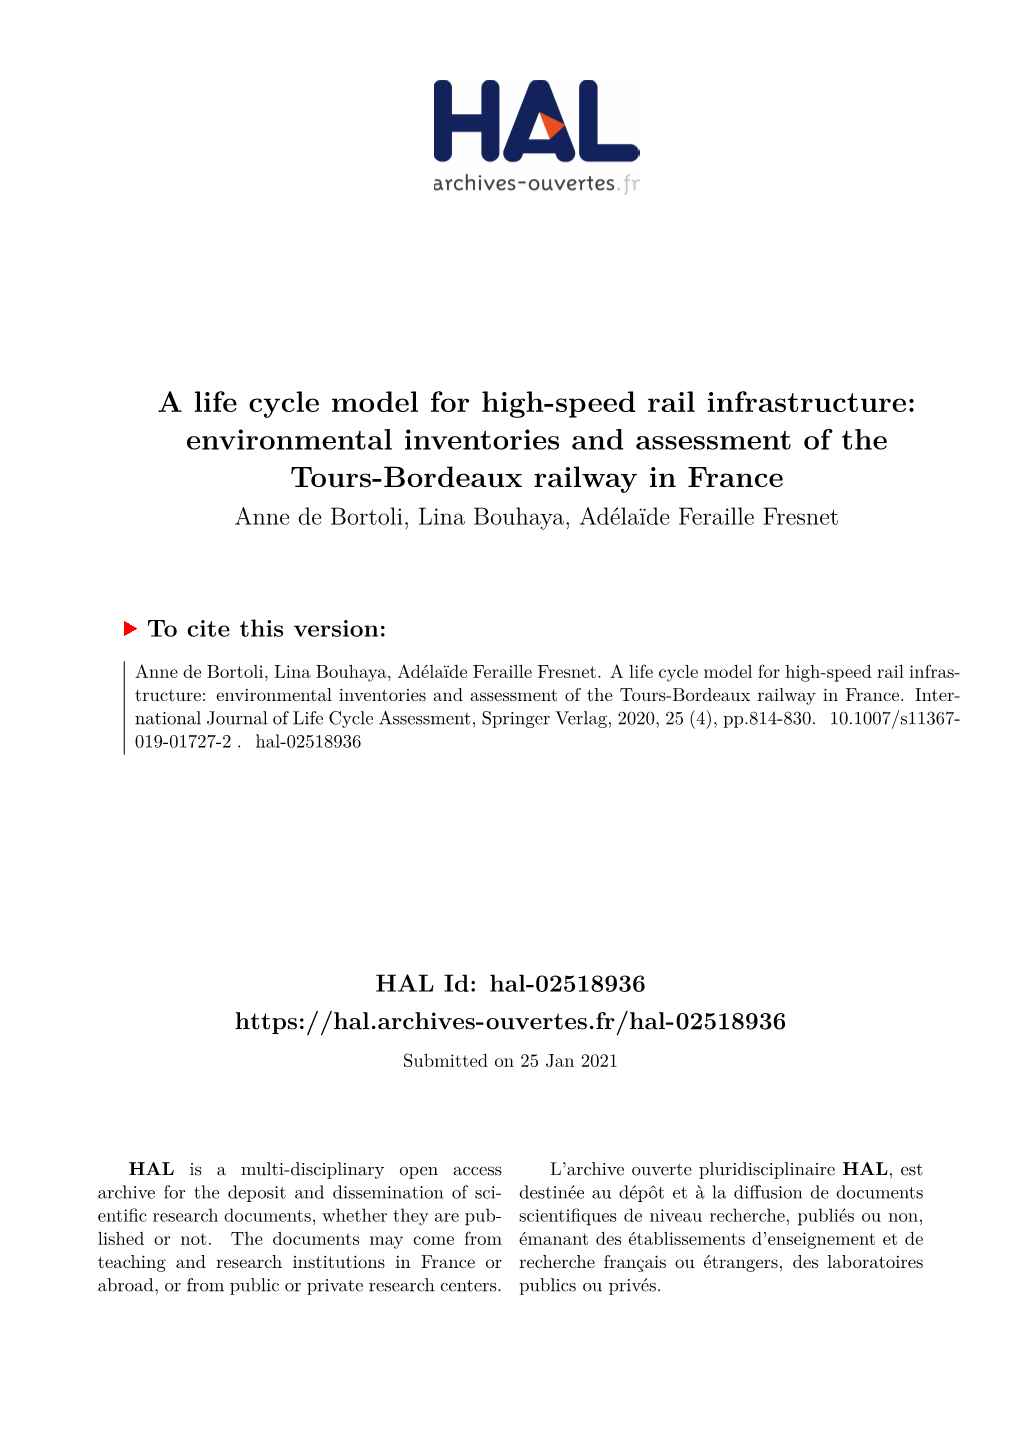 A Life Cycle Model for High-Speed Rail Infrastructure